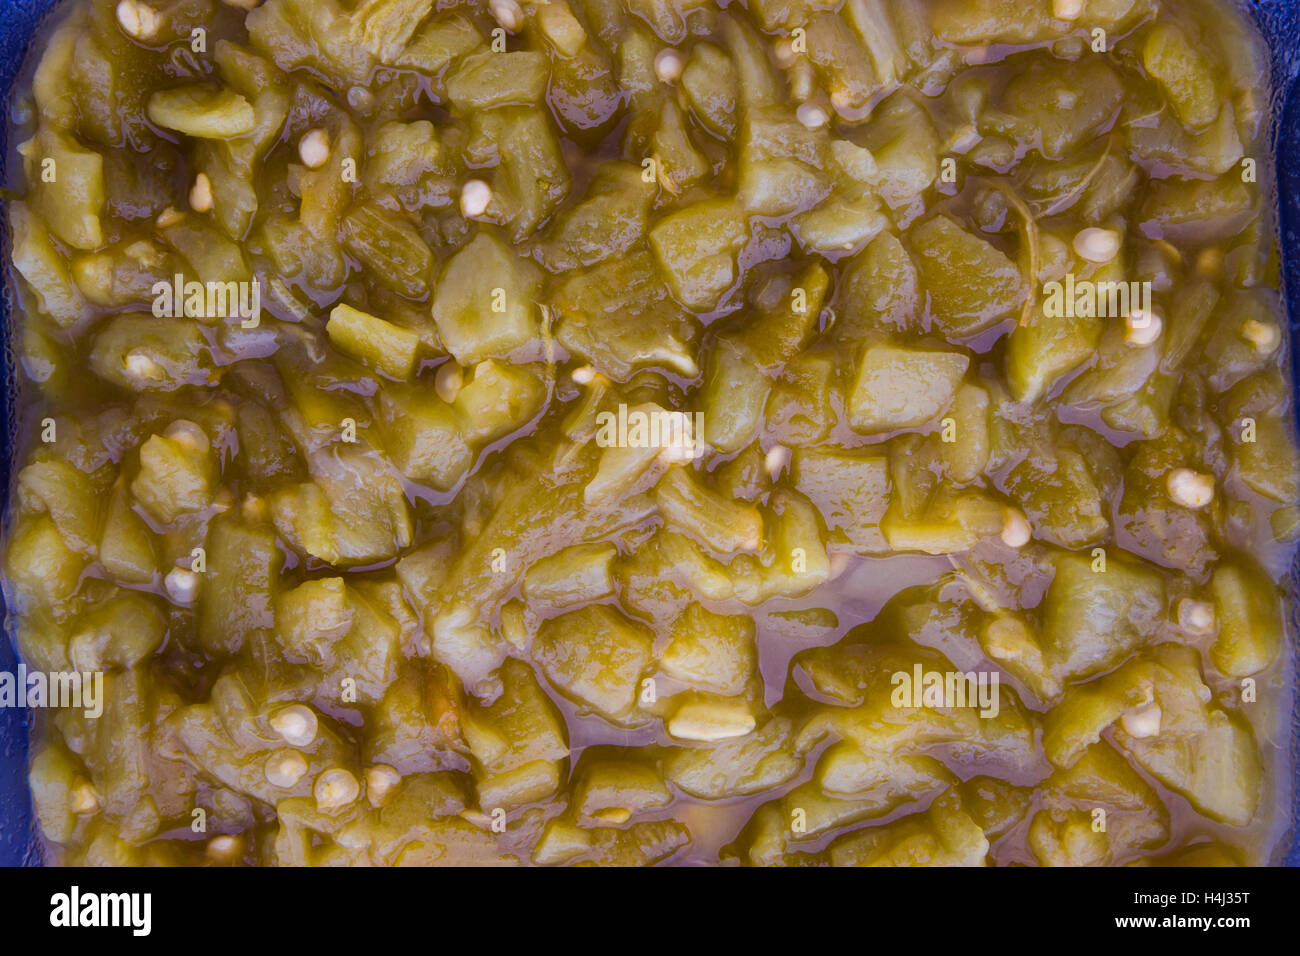 canned diced green chili peppers Stock Photo